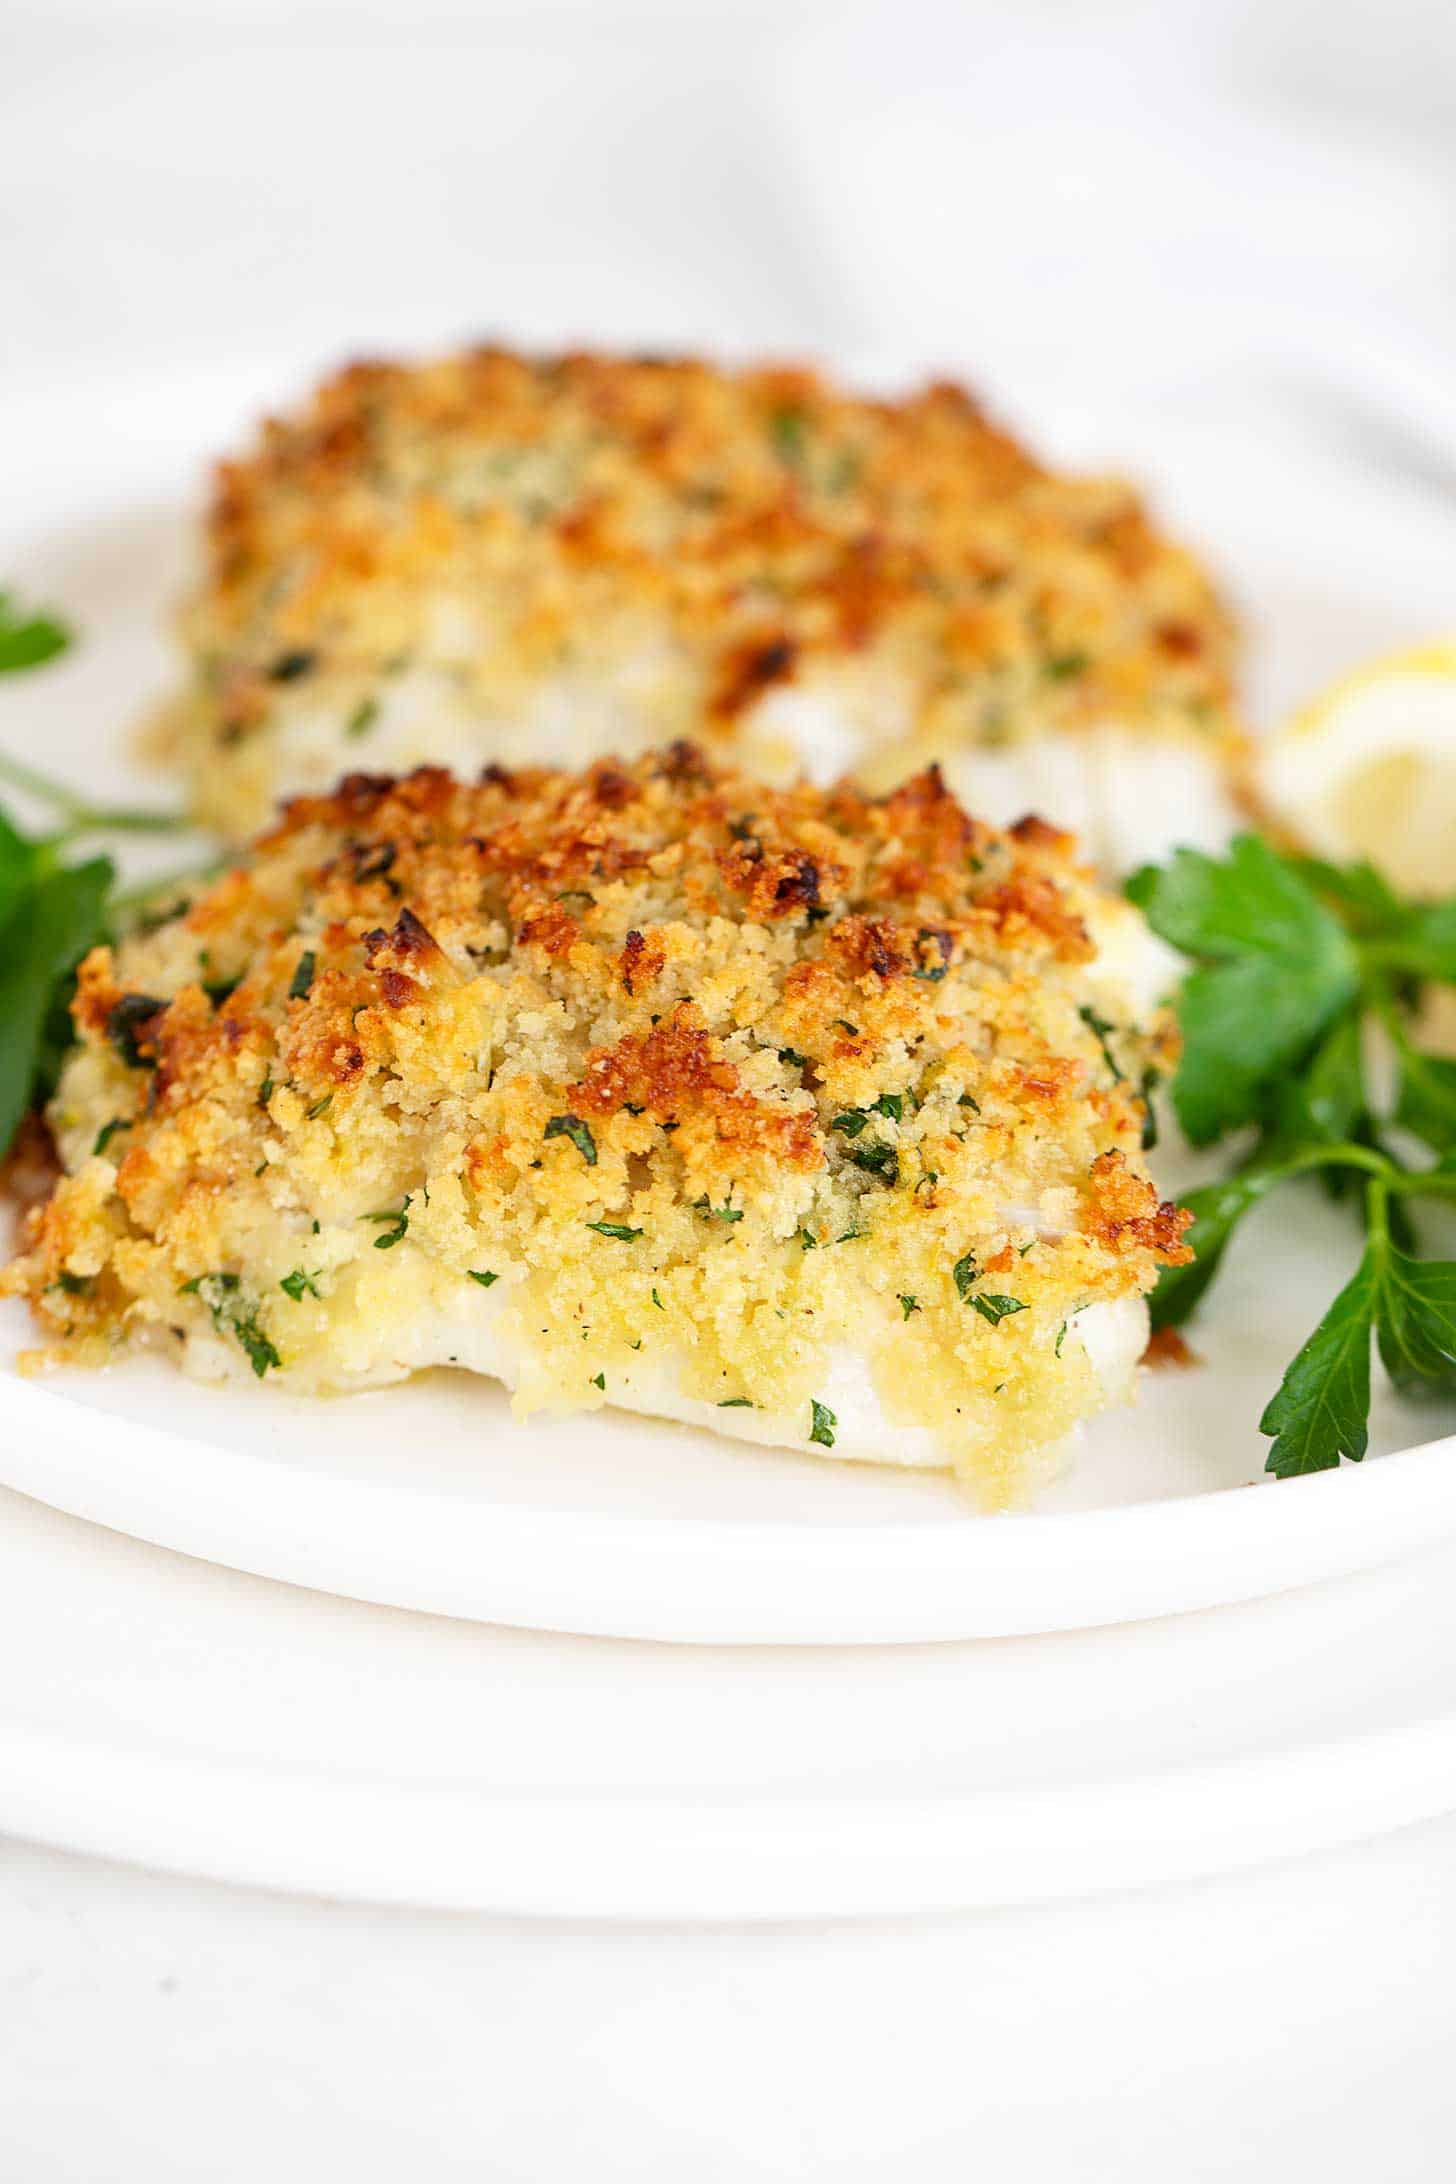 Panko-crusted cod on plate with parsley and lemon wedges.